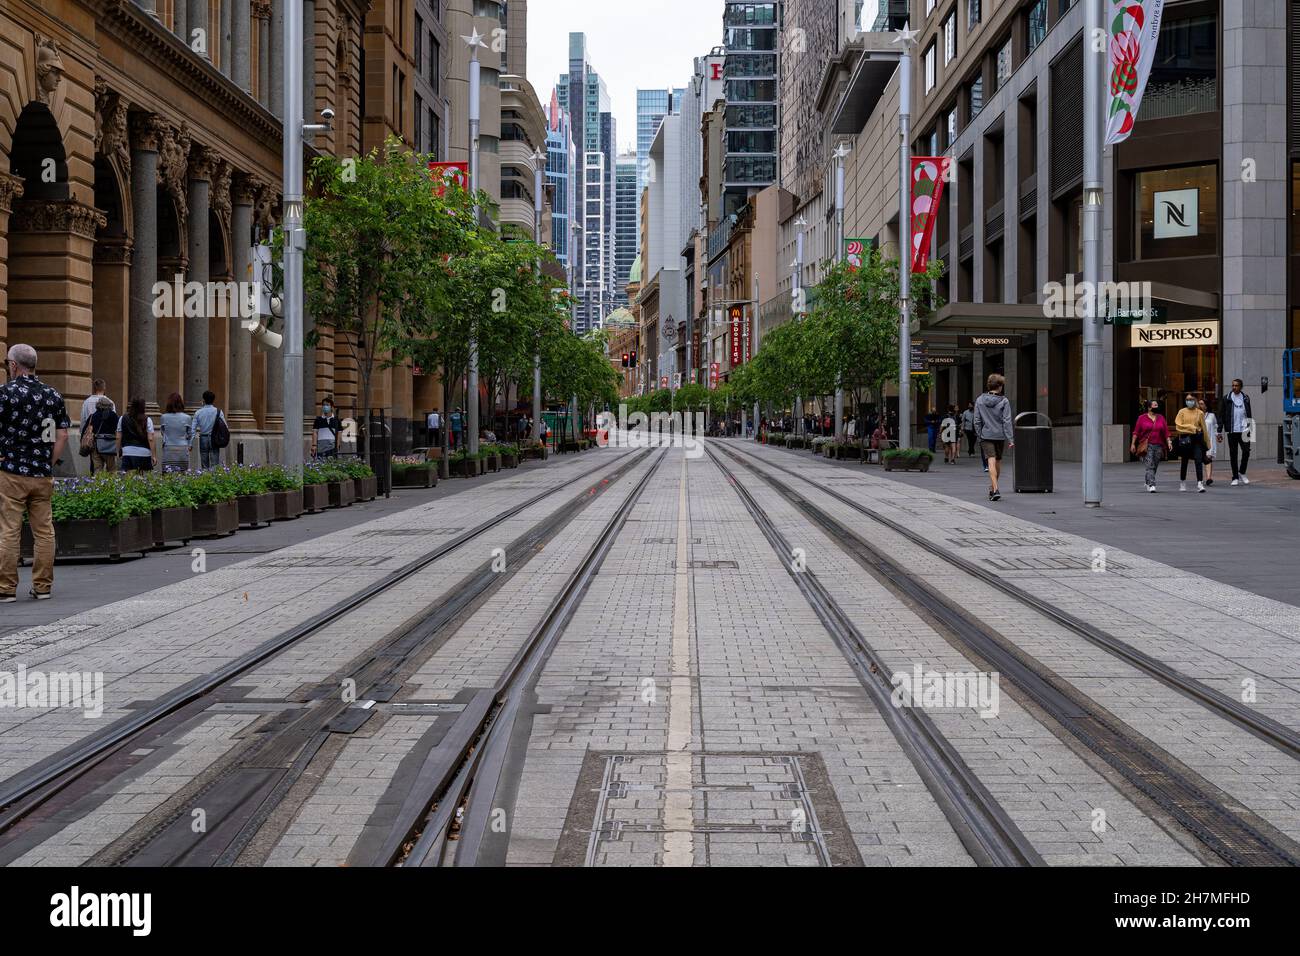 Street view of tram train tracks in Central Business District at George Street, Sydney, Australia on 20 November 2021. Road, People and buildings. Stock Photo